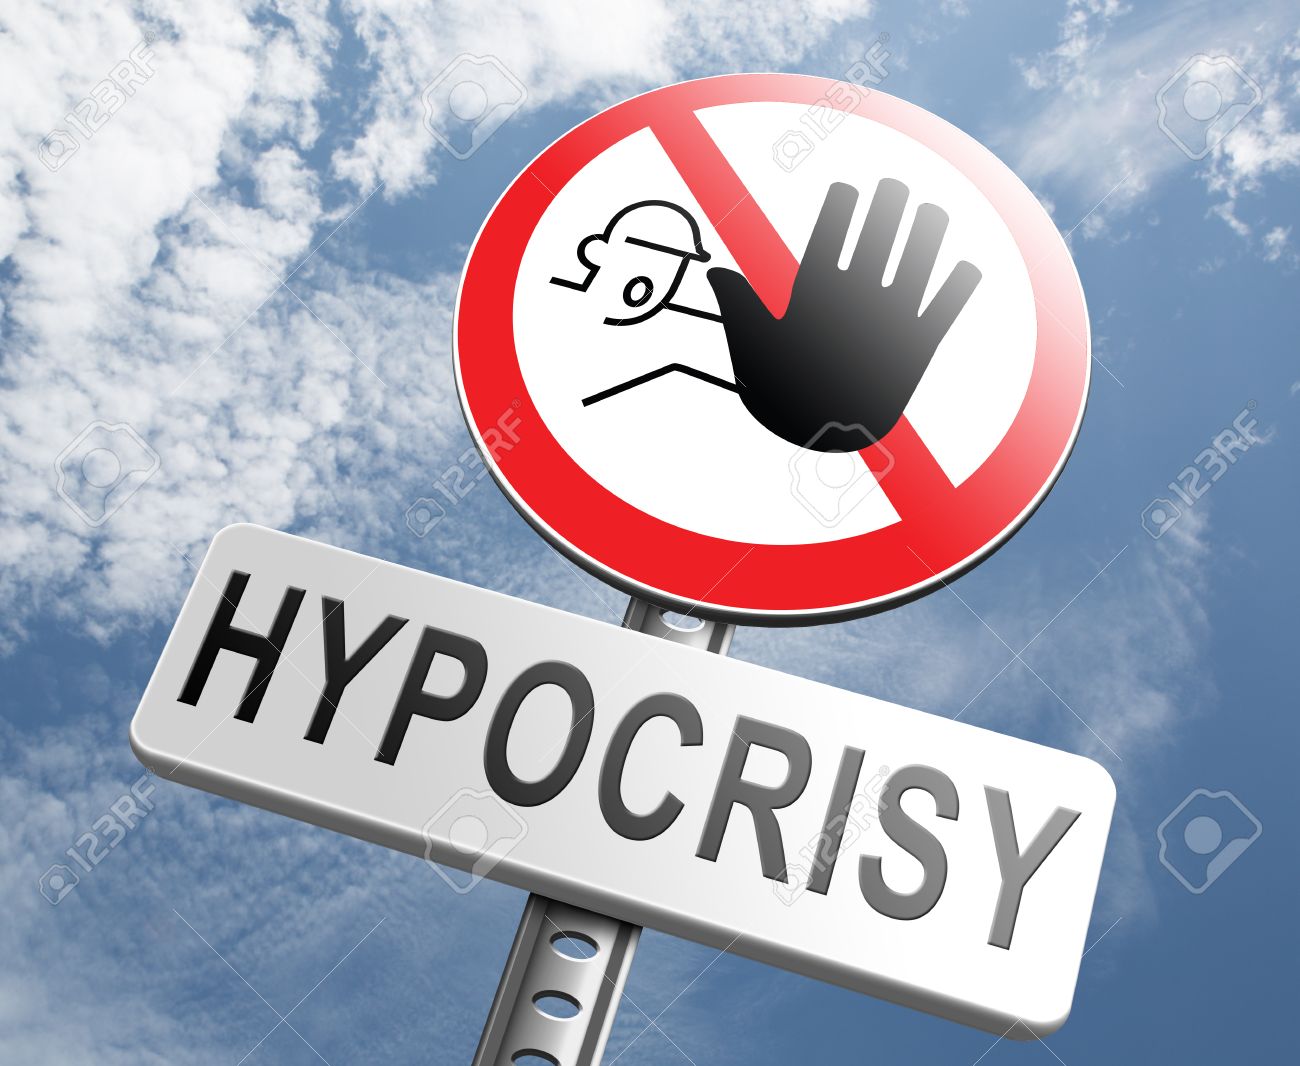 40380141-stop-hypocrisy-having-two-faces-pretending-and-faking-hypocrite-Stock-Photo.jpg